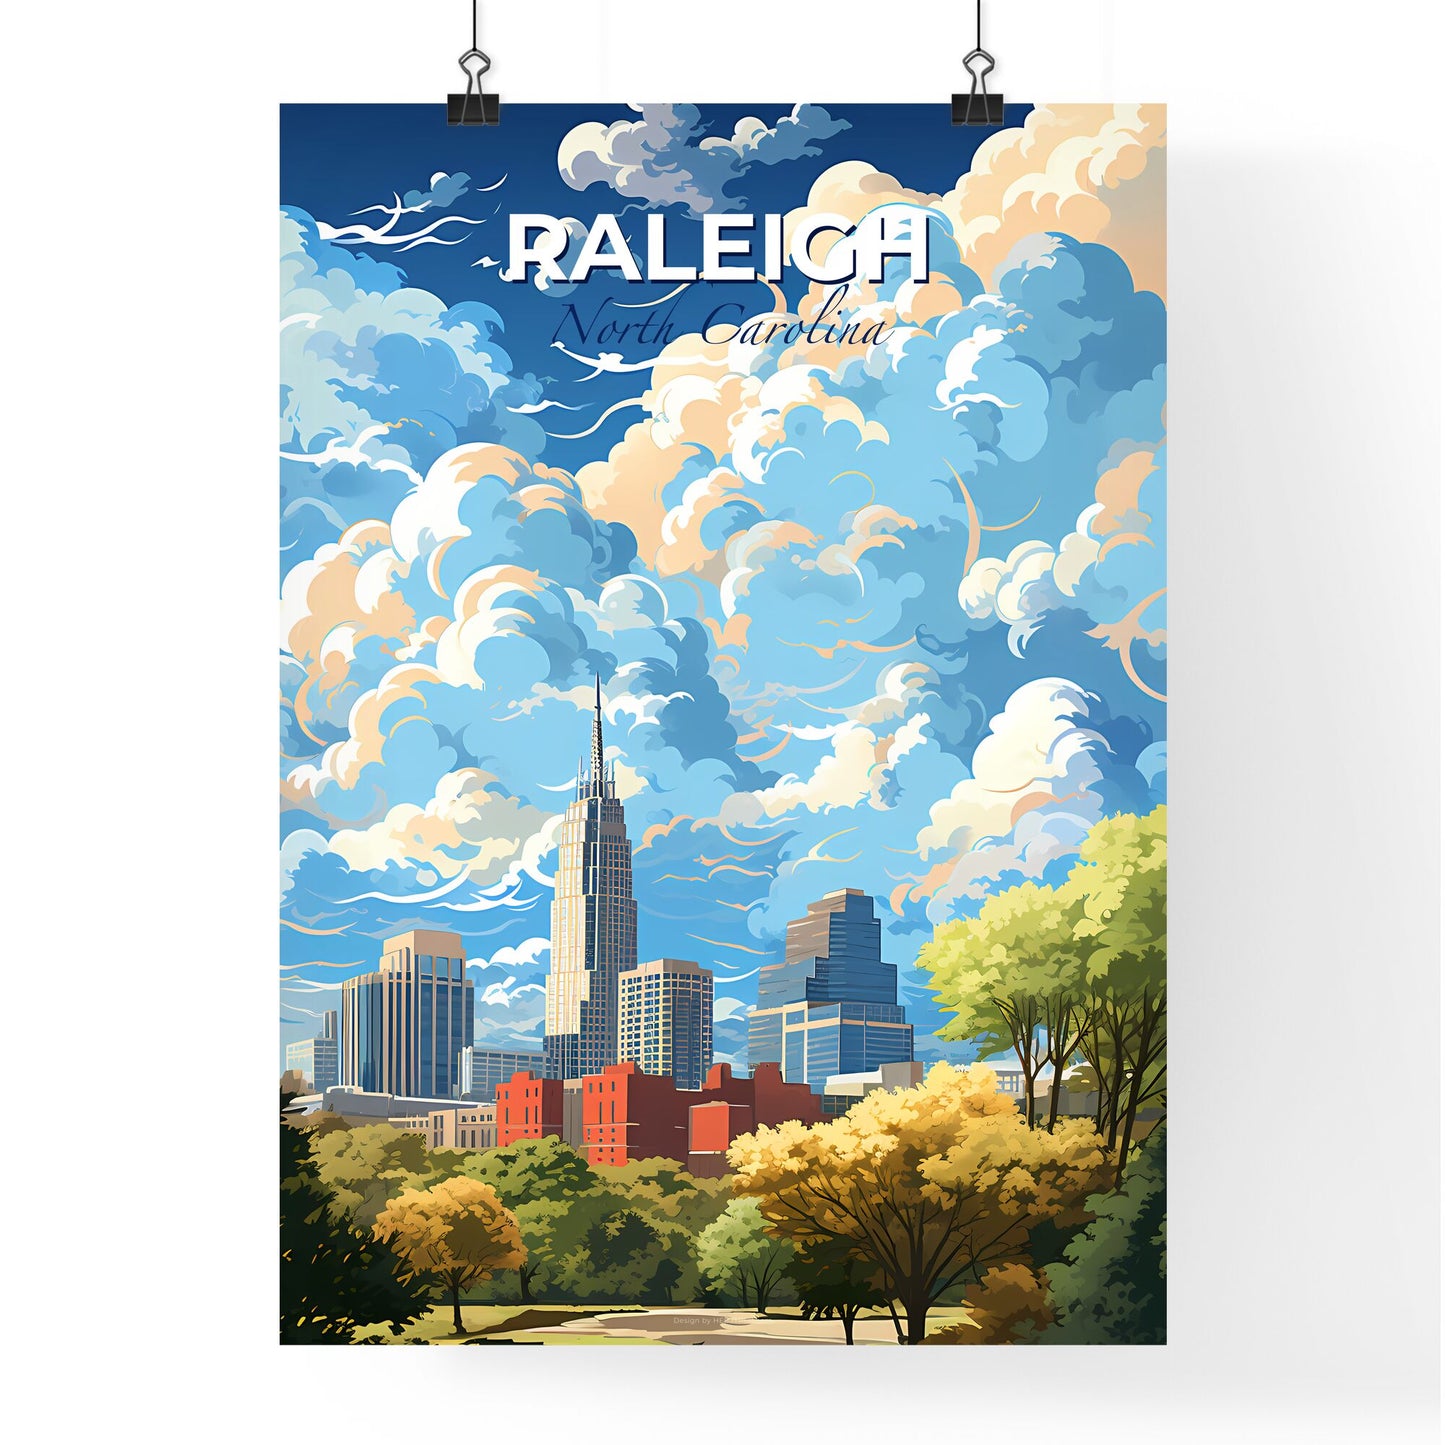 Raleigh North Carolina Skyline - A Cityscape With Clouds And Trees - Customizable Travel Gift Default Title